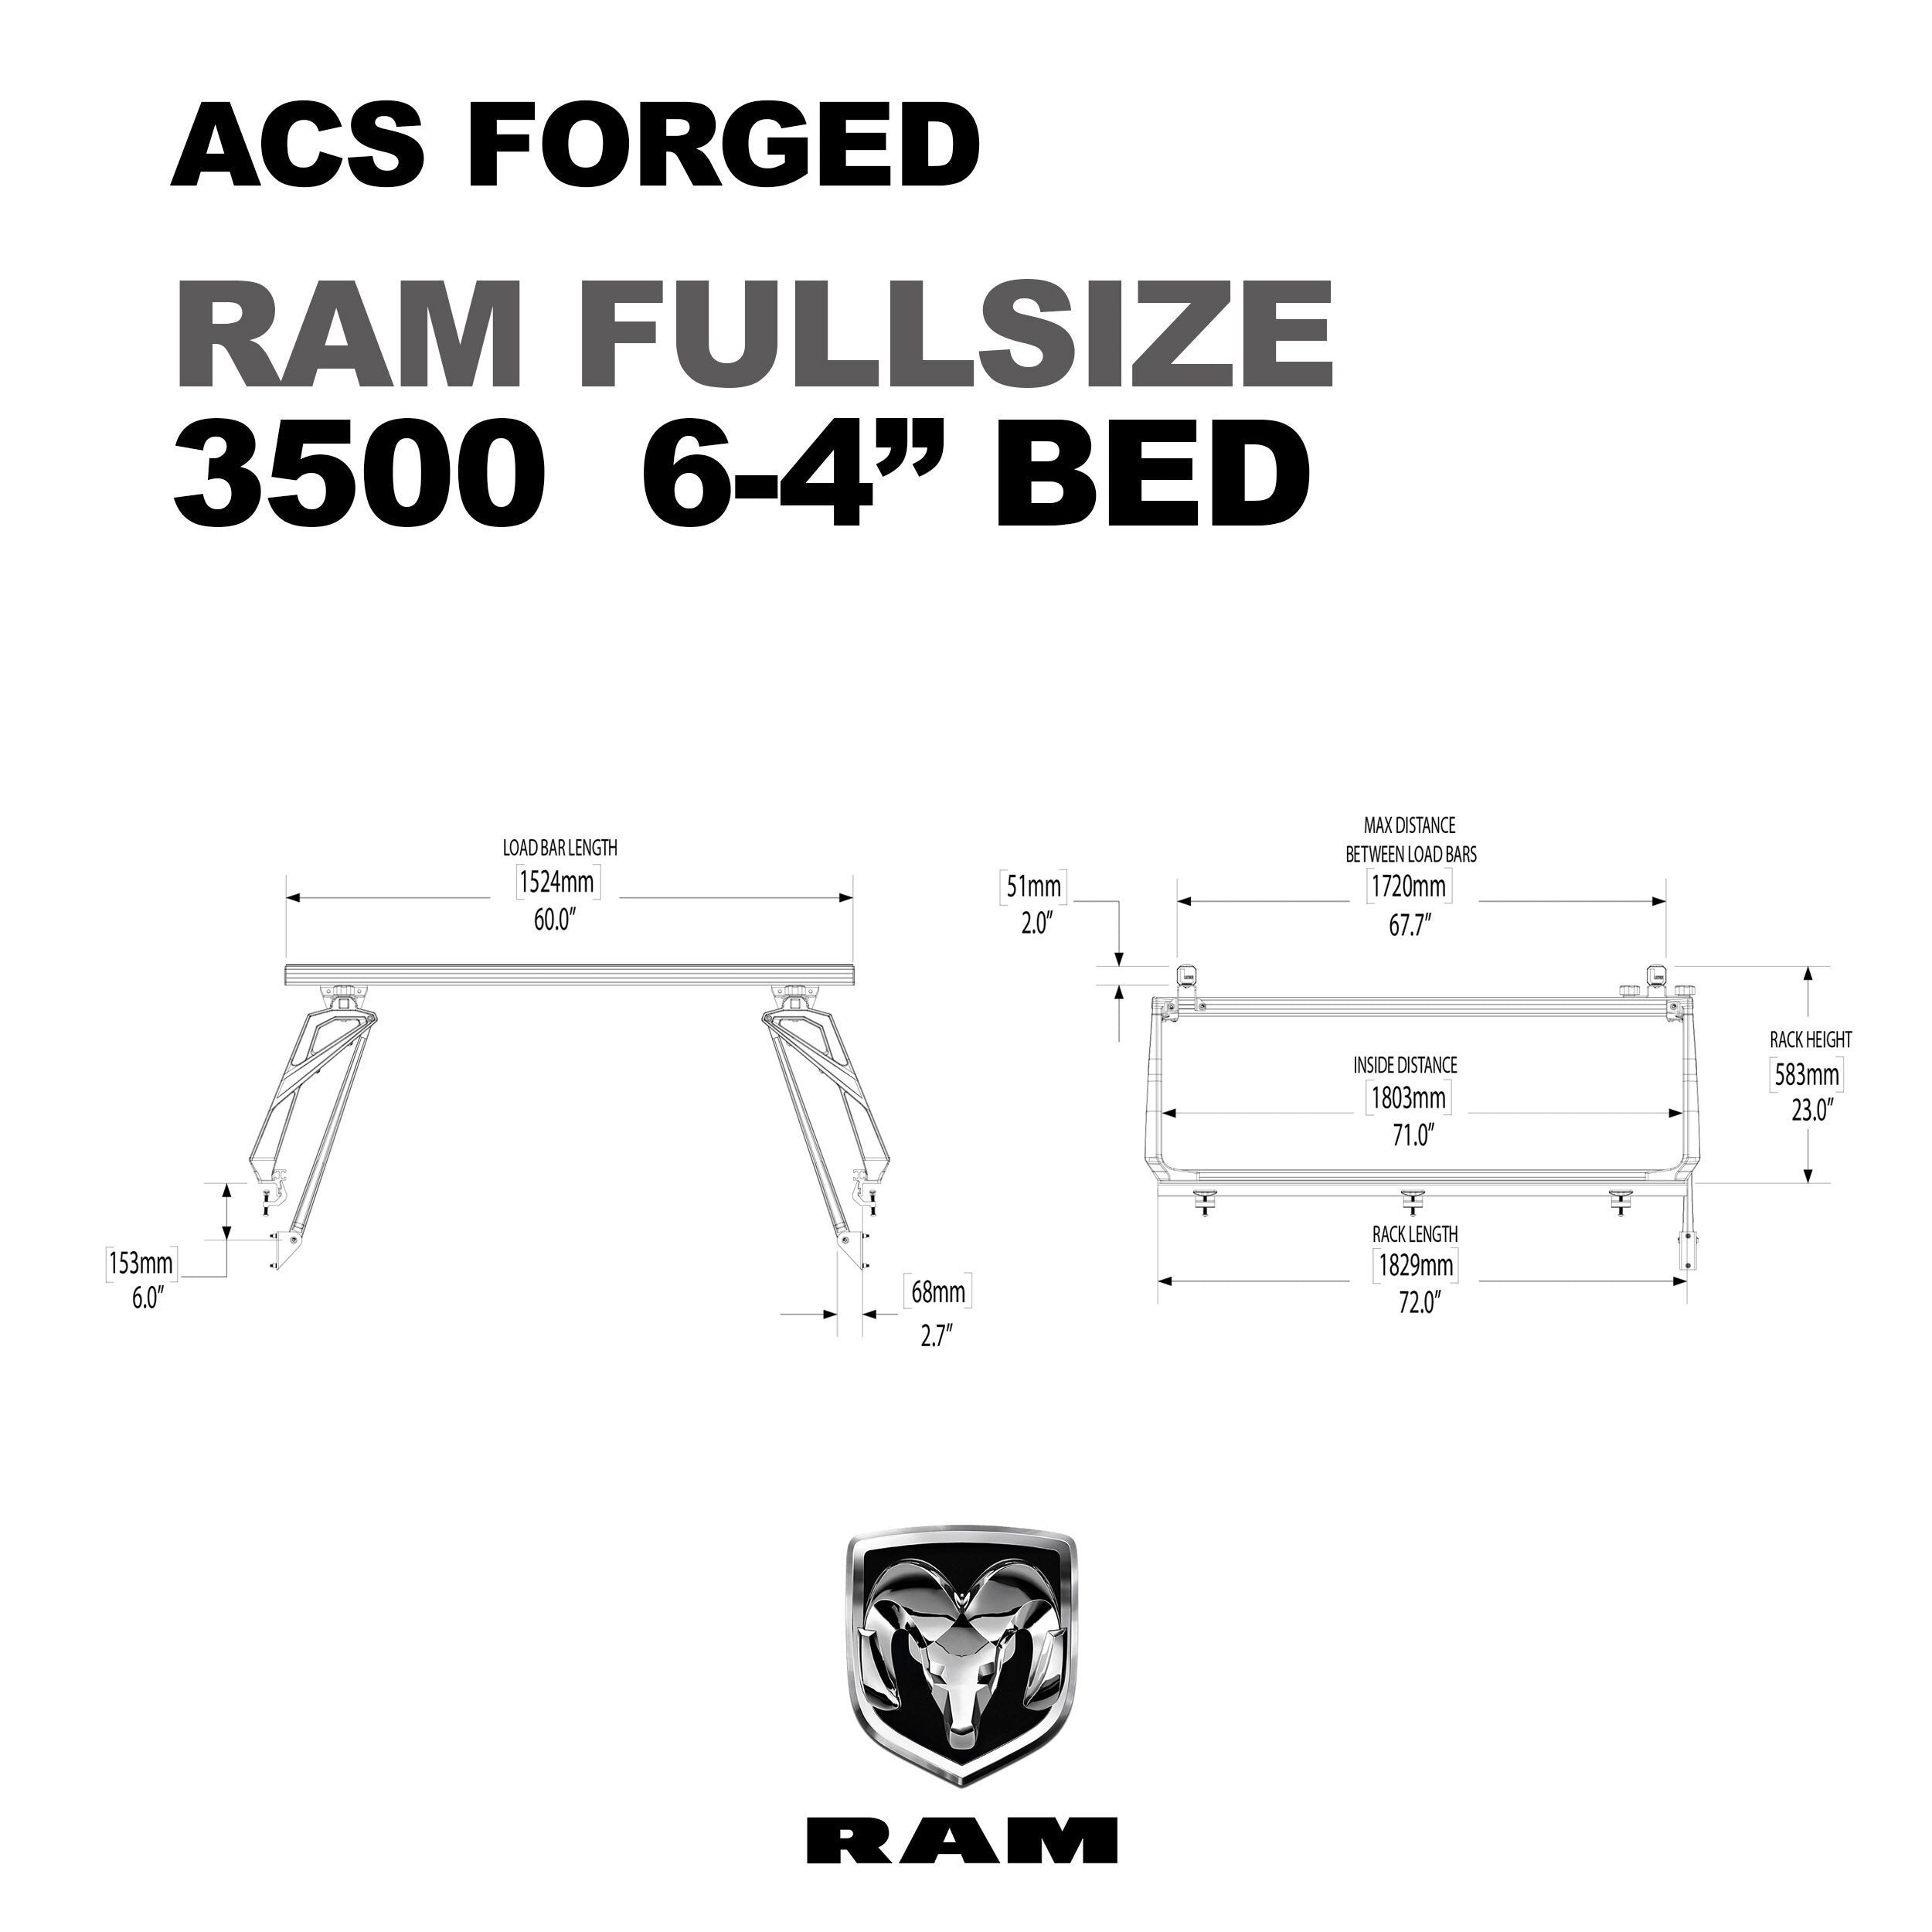 '09-20 Dodge Ram 2500/3500-ACS Forged Bed Accessories Leitner Designs design